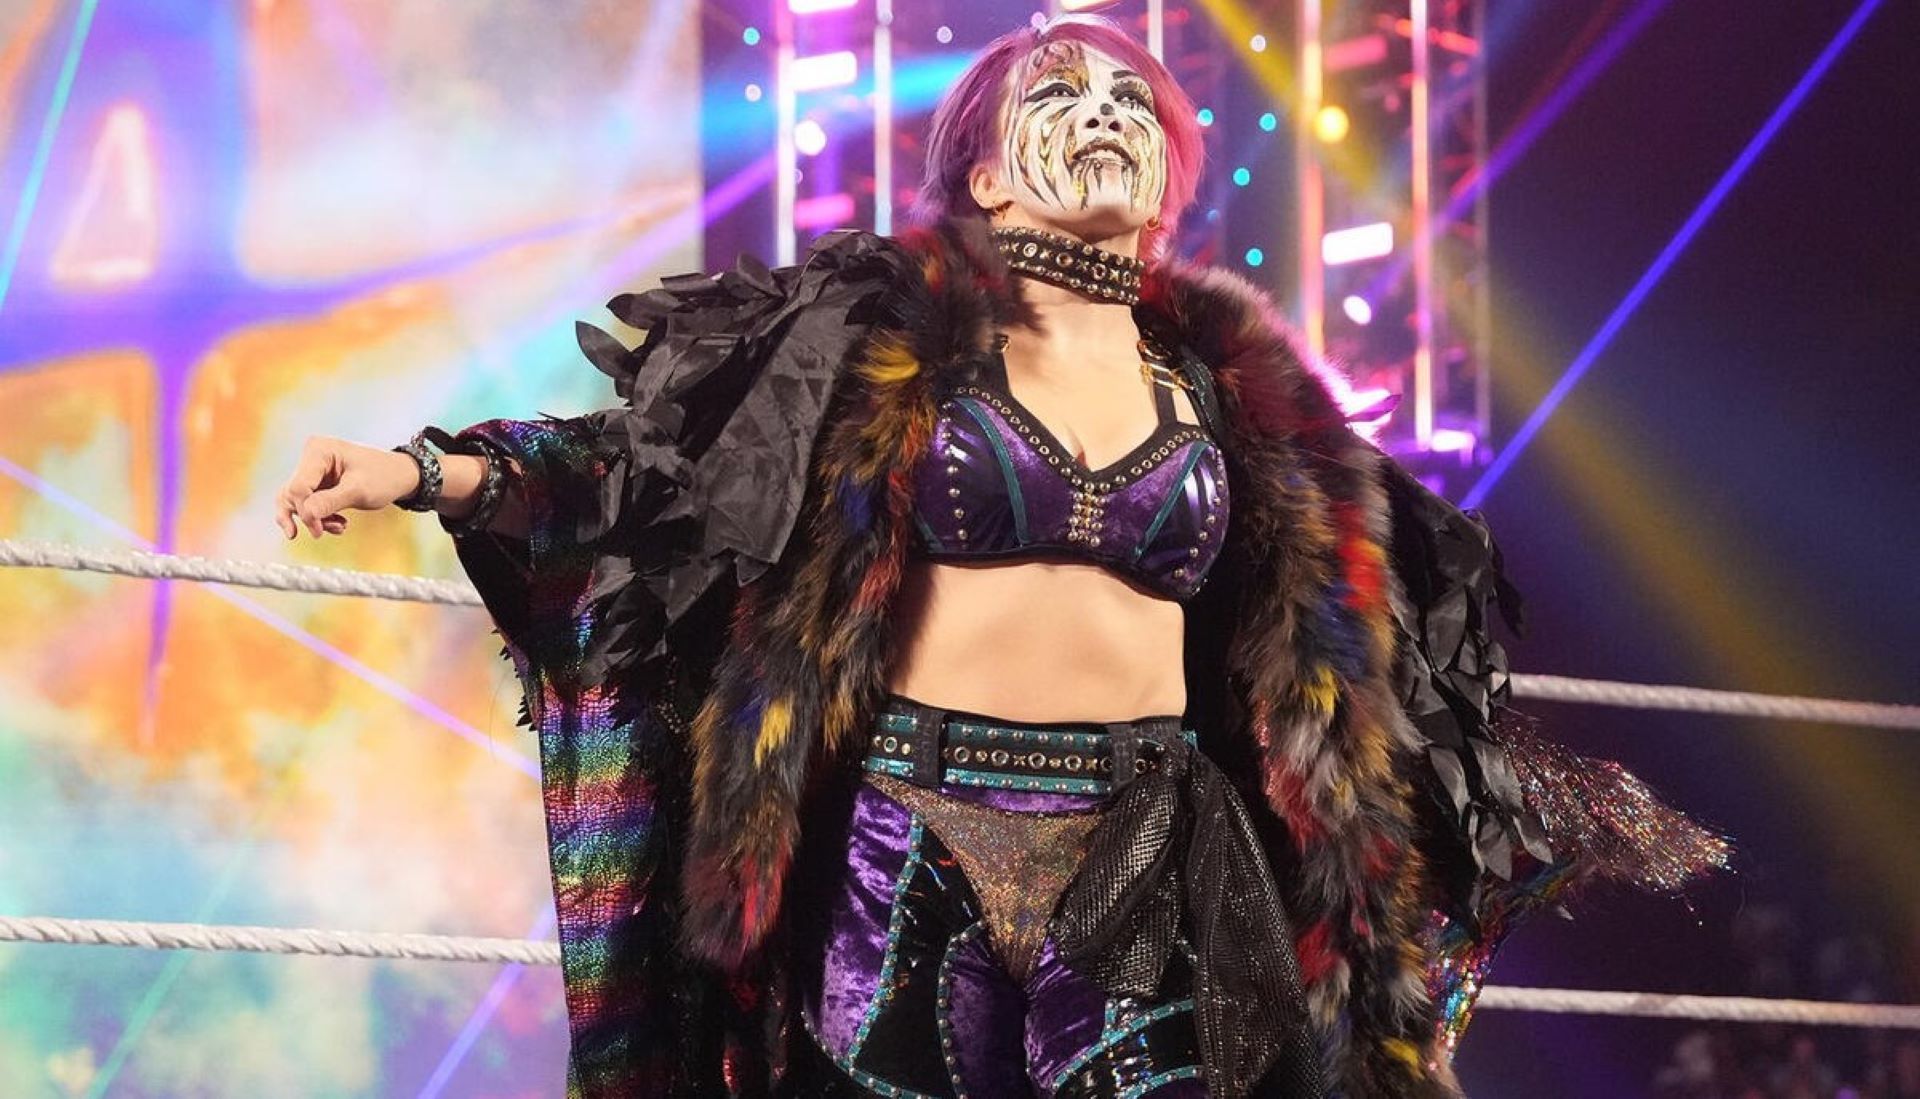 Asuka has won many titles in her career.